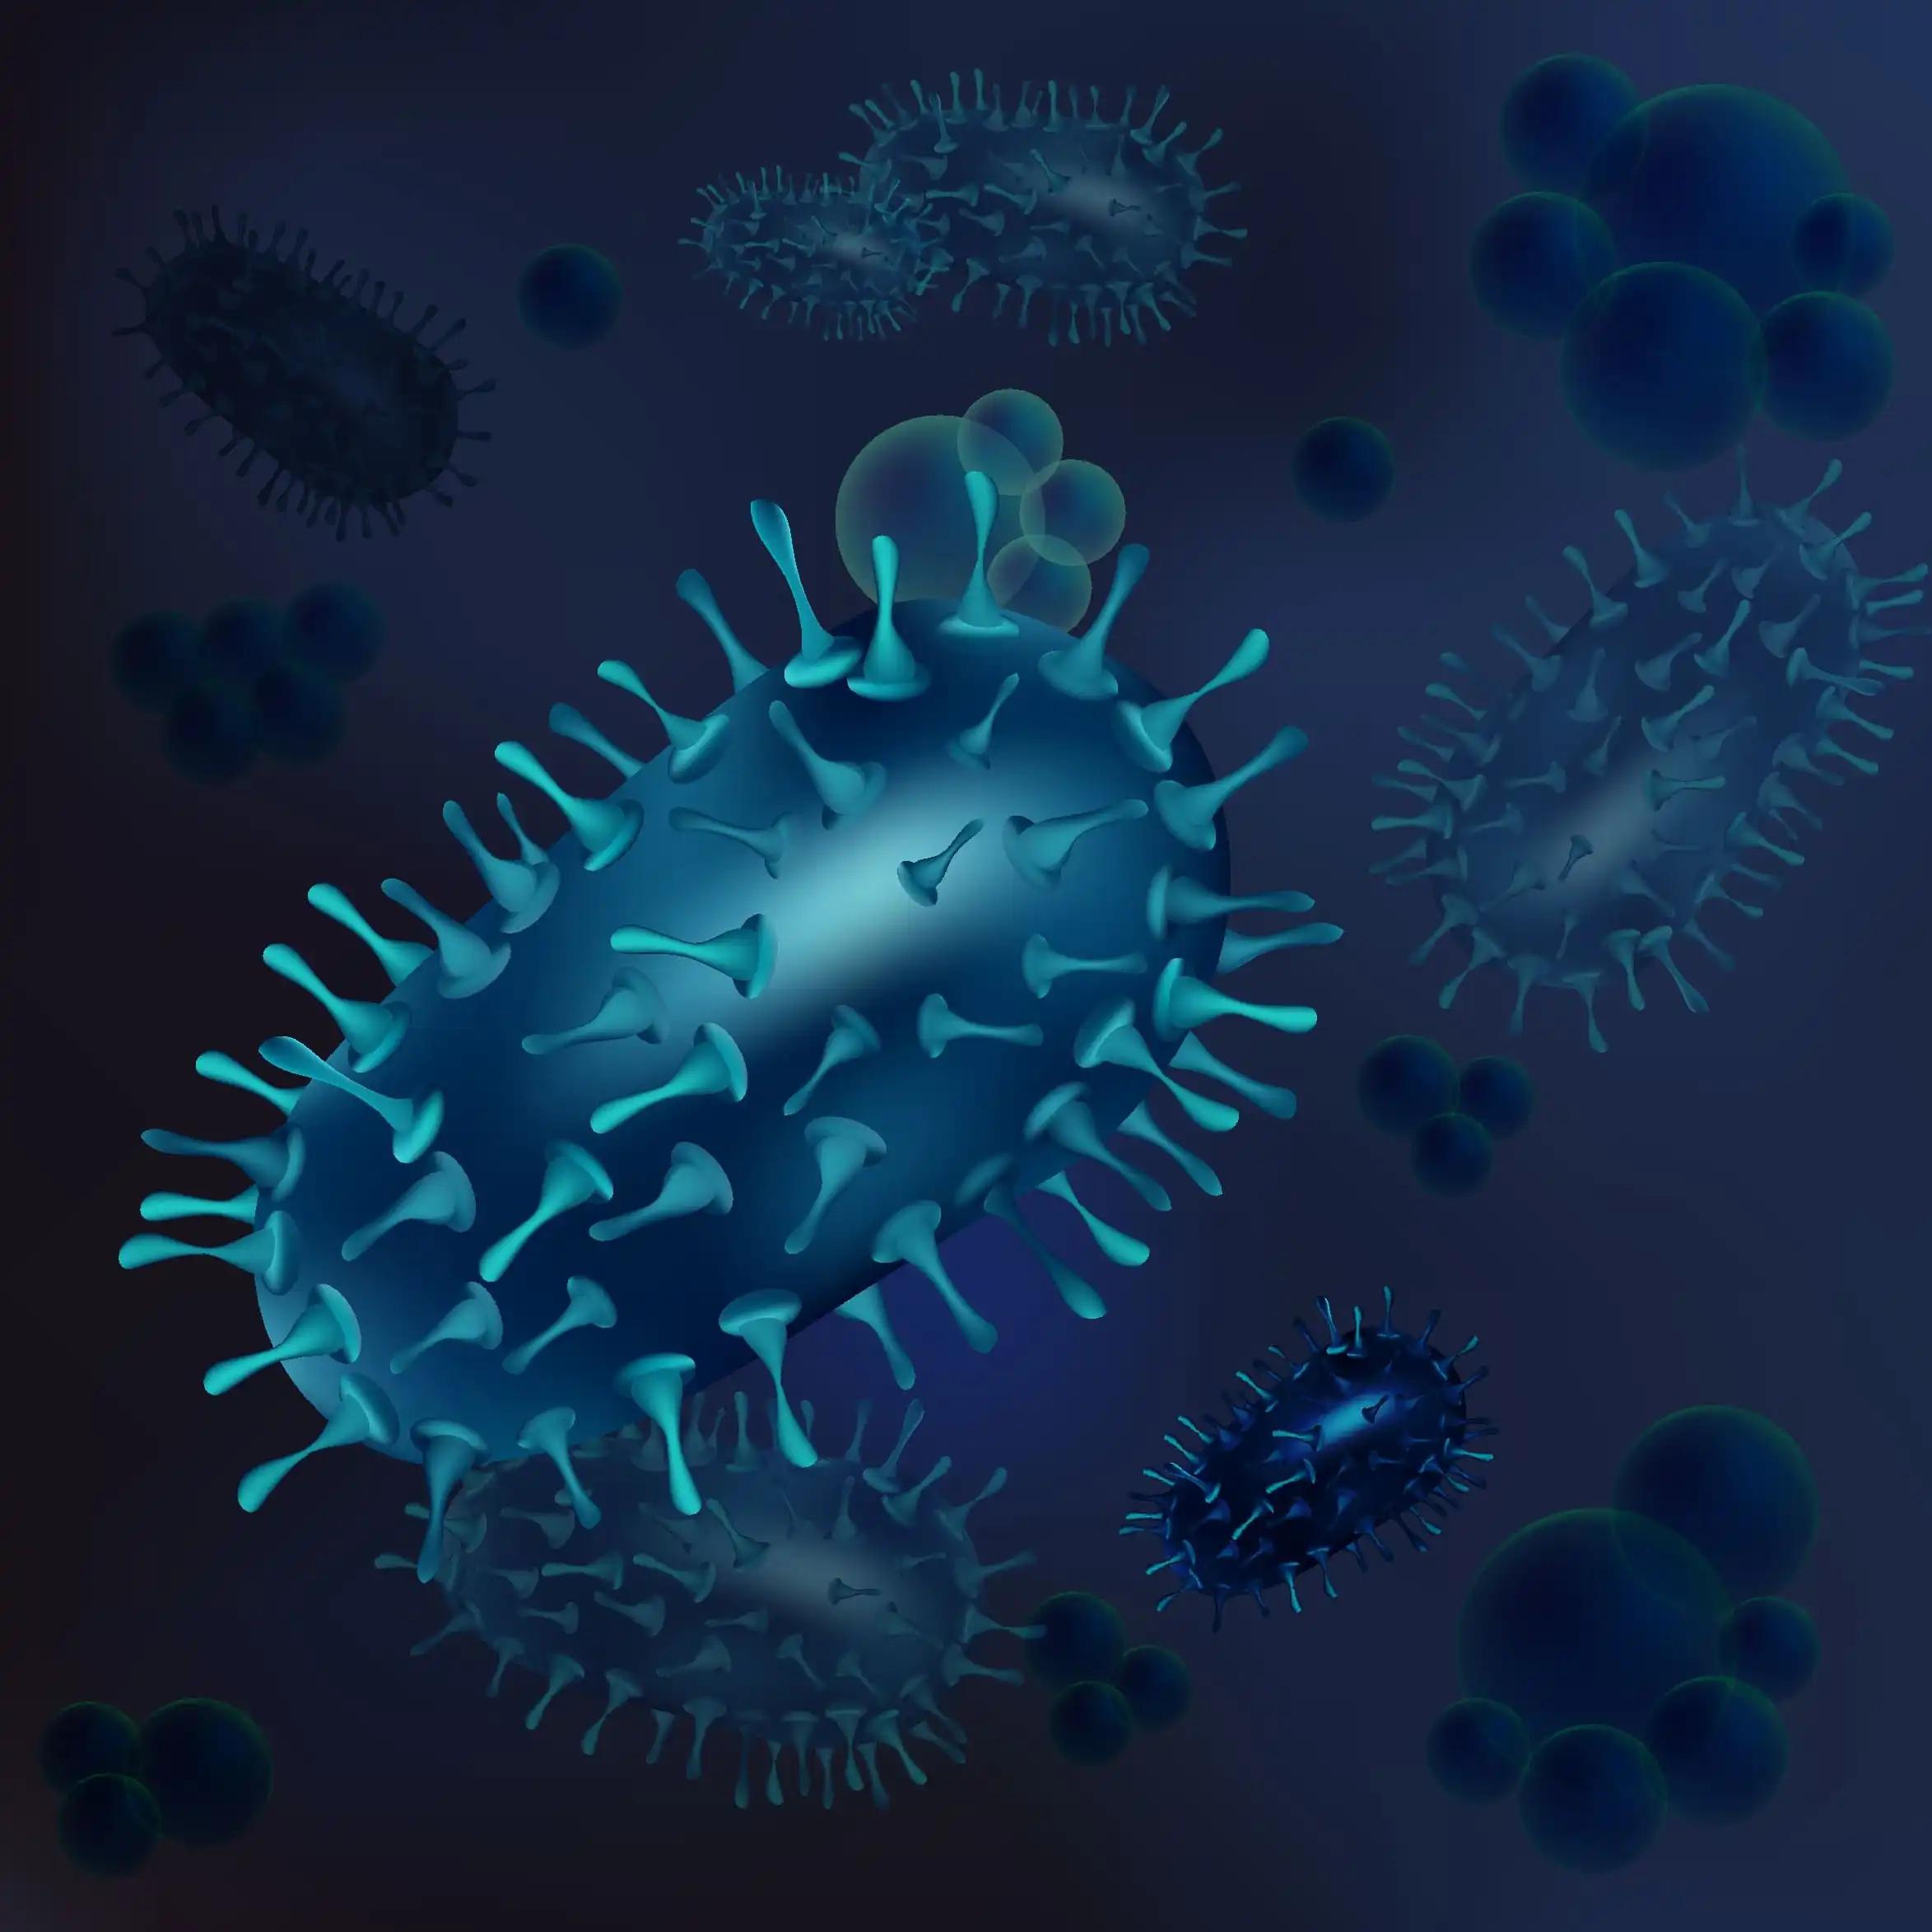 Prostate Cancer Viruses and Bacteria Under the Microscope